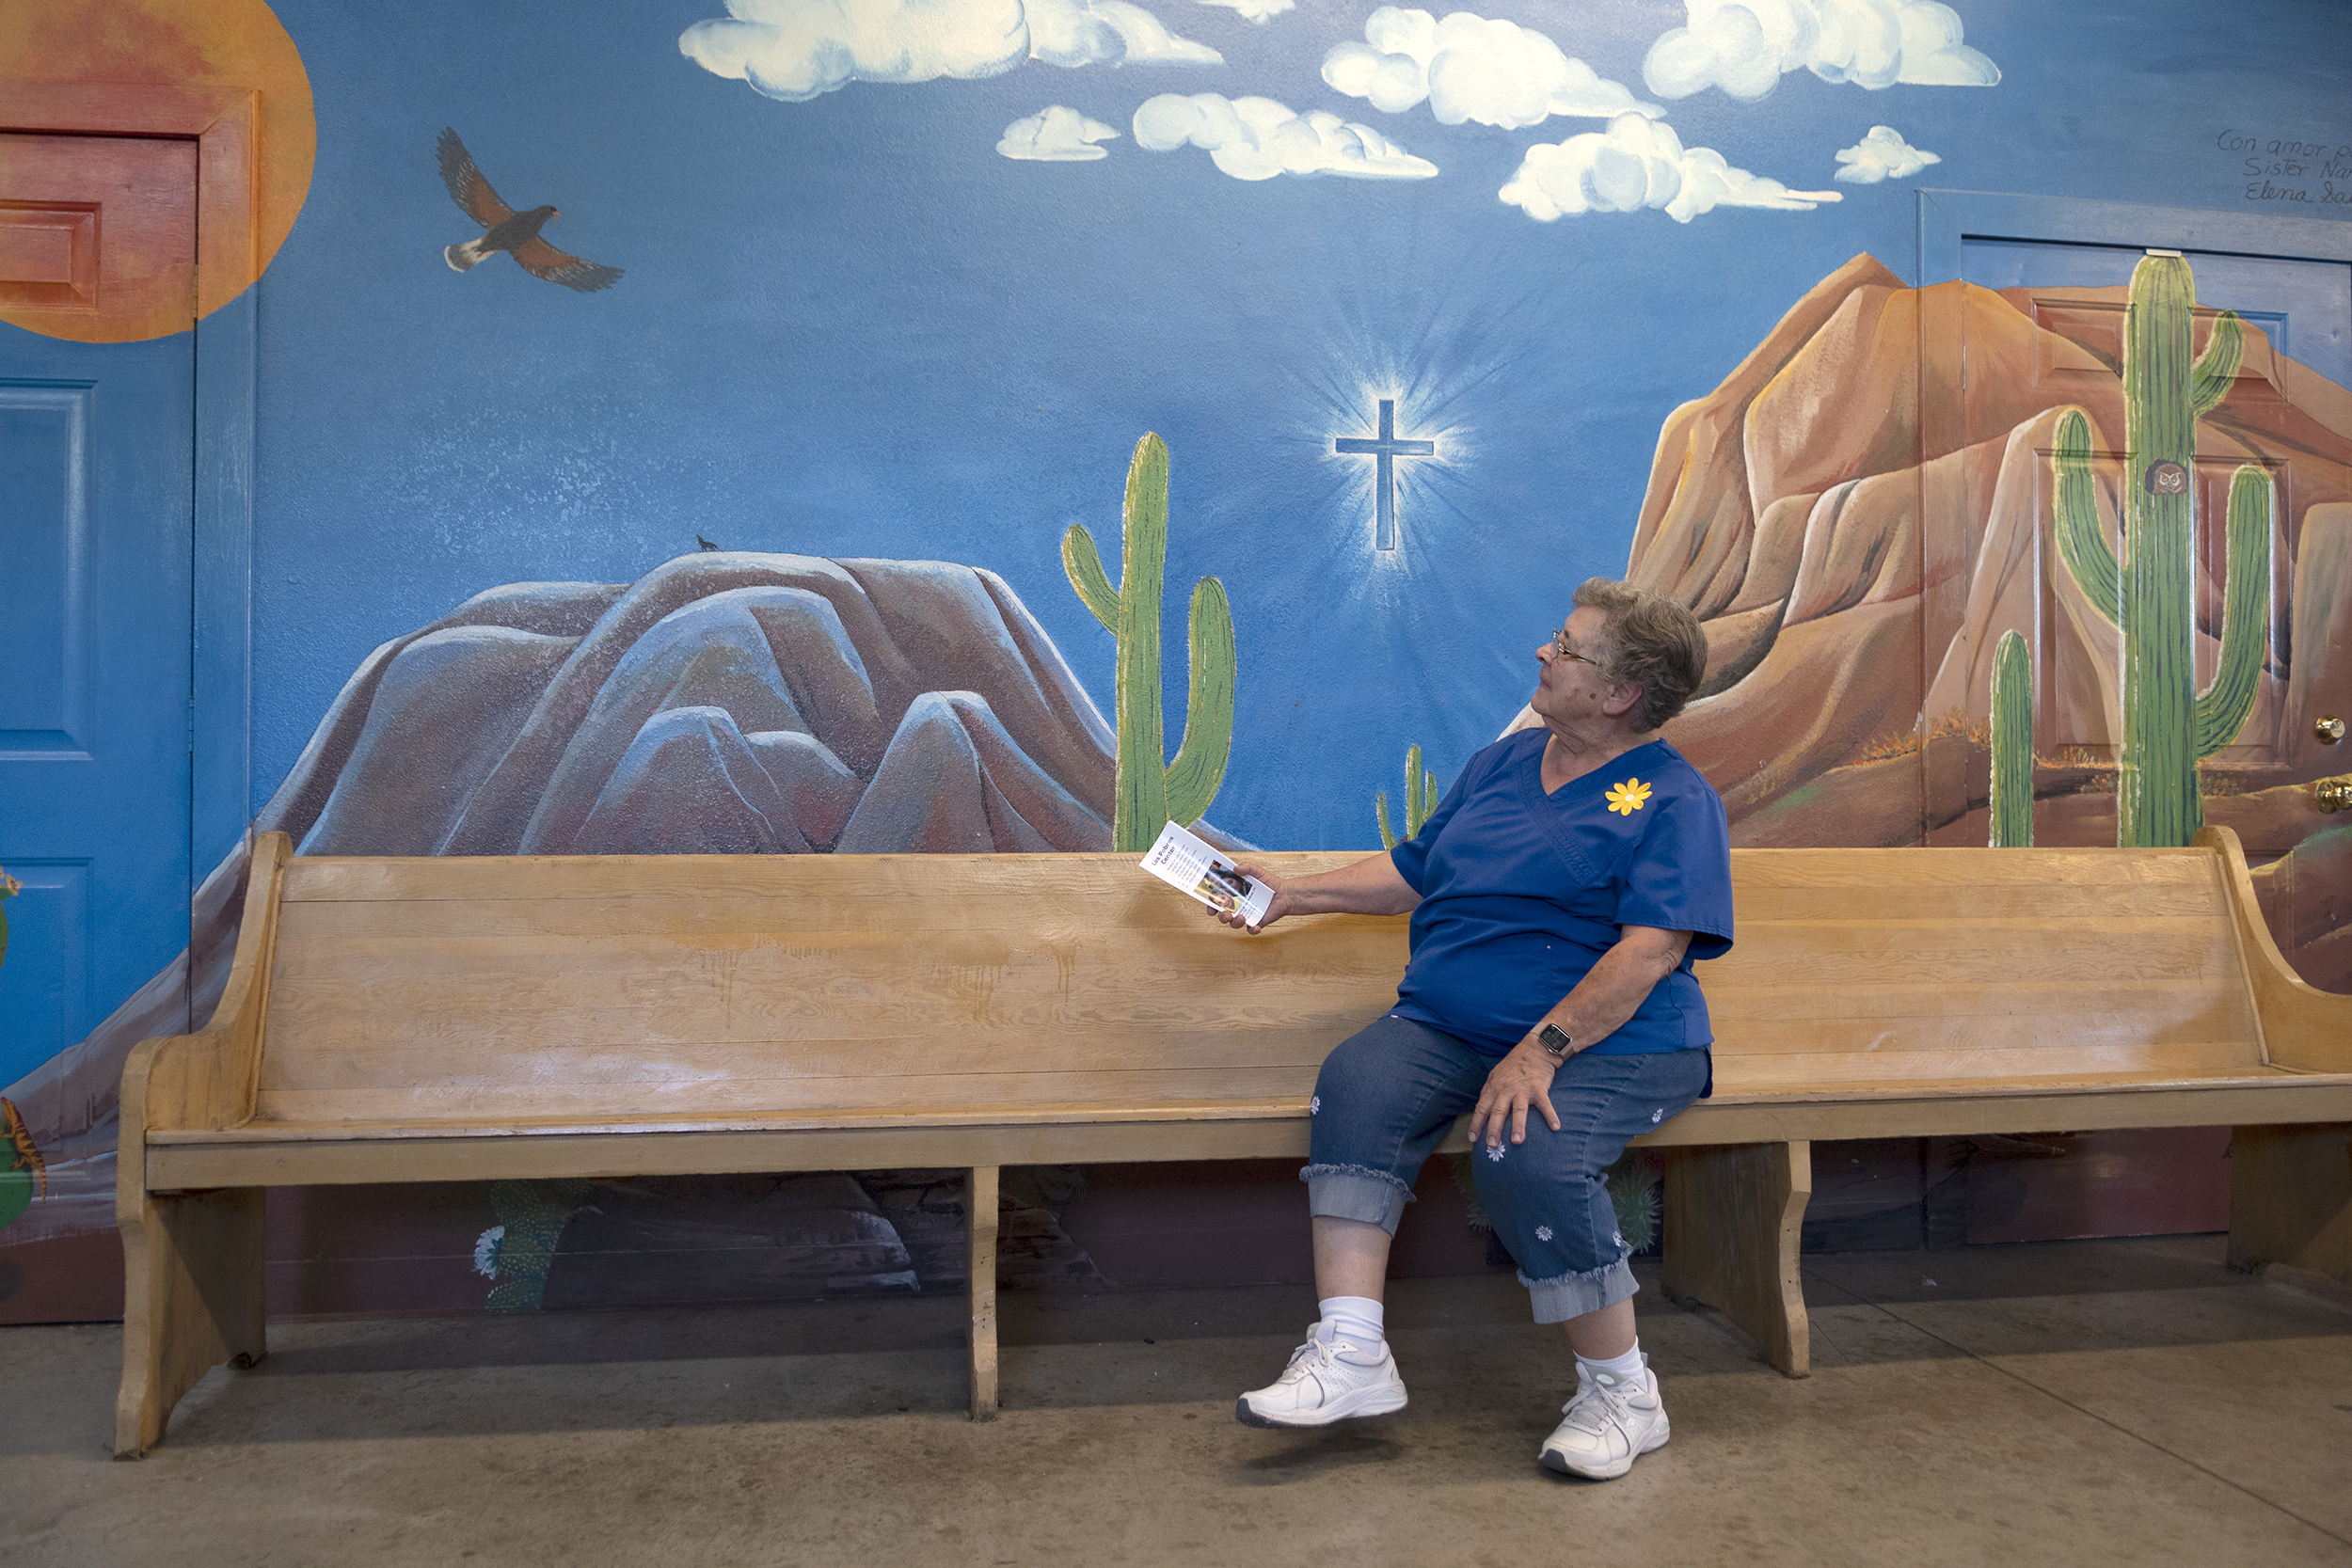 Sister Nancy sits on a donated pew bench and looks up at artwork behind her depicting a white cross centered within a bright blue mural depicting mountains, a cactus, hawk, and the sky.